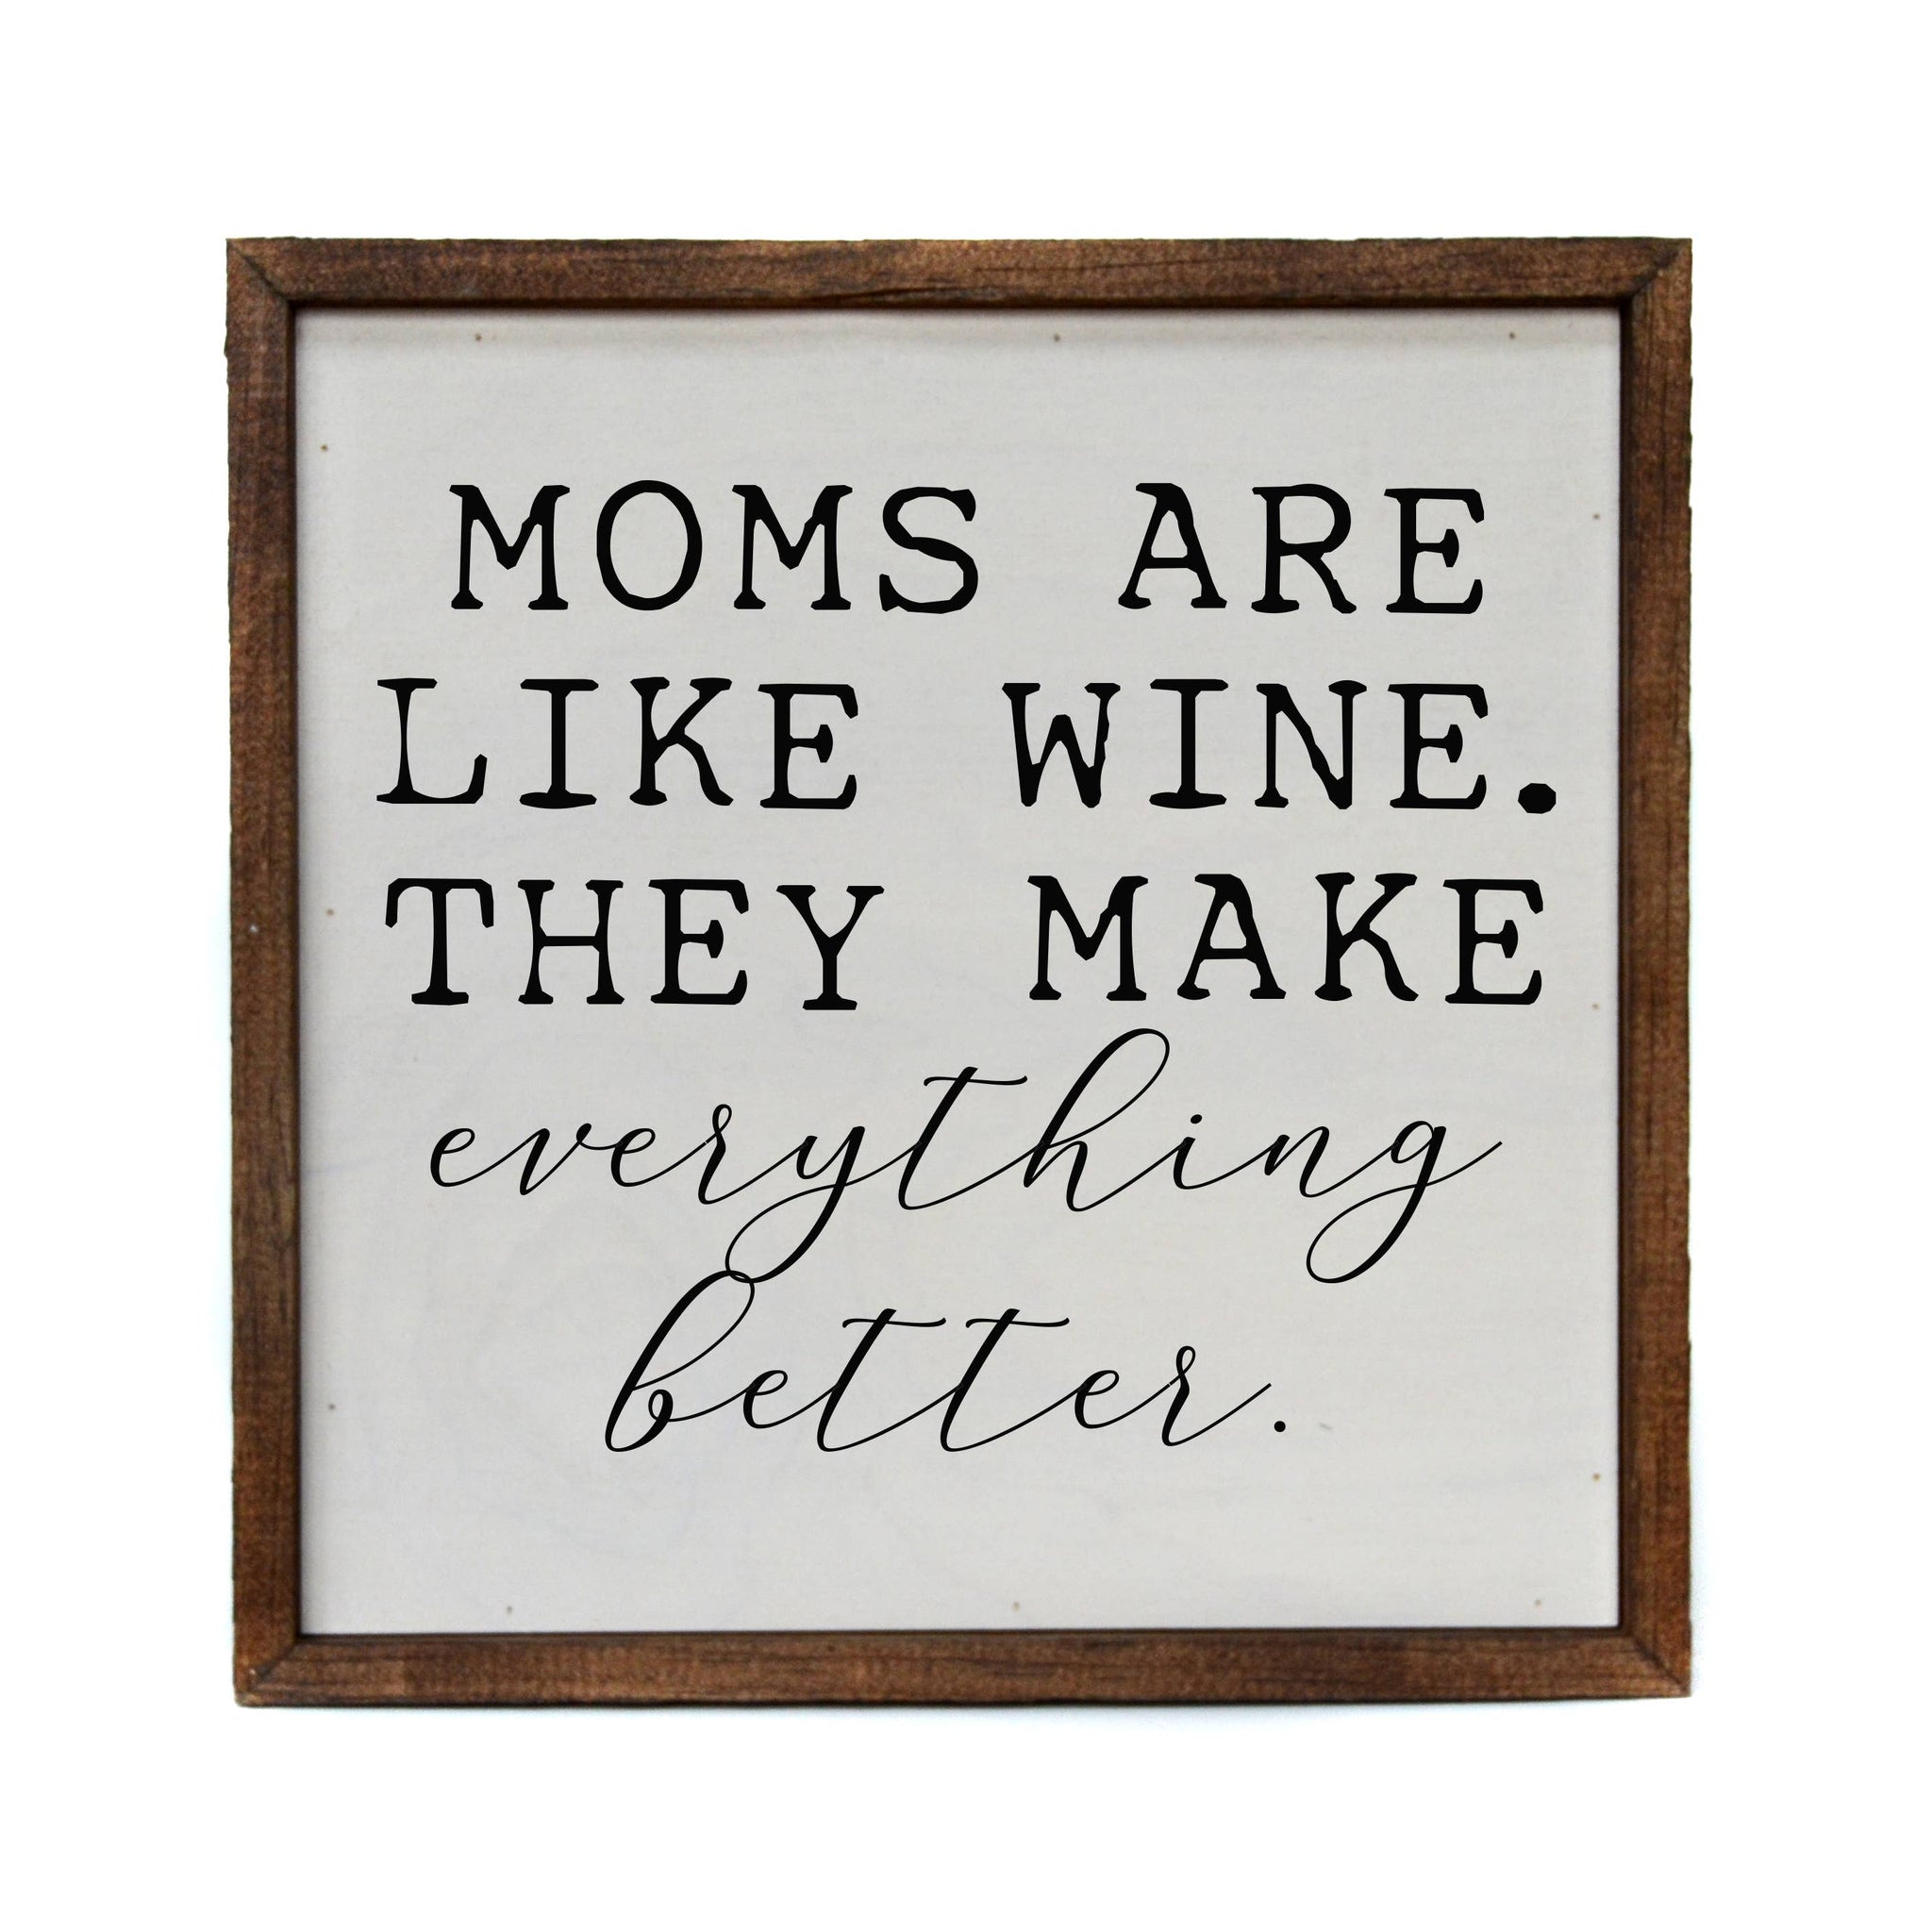 Driftless Studios - 10x10 Moms Are Like Wine. They Make Everything Better Sign